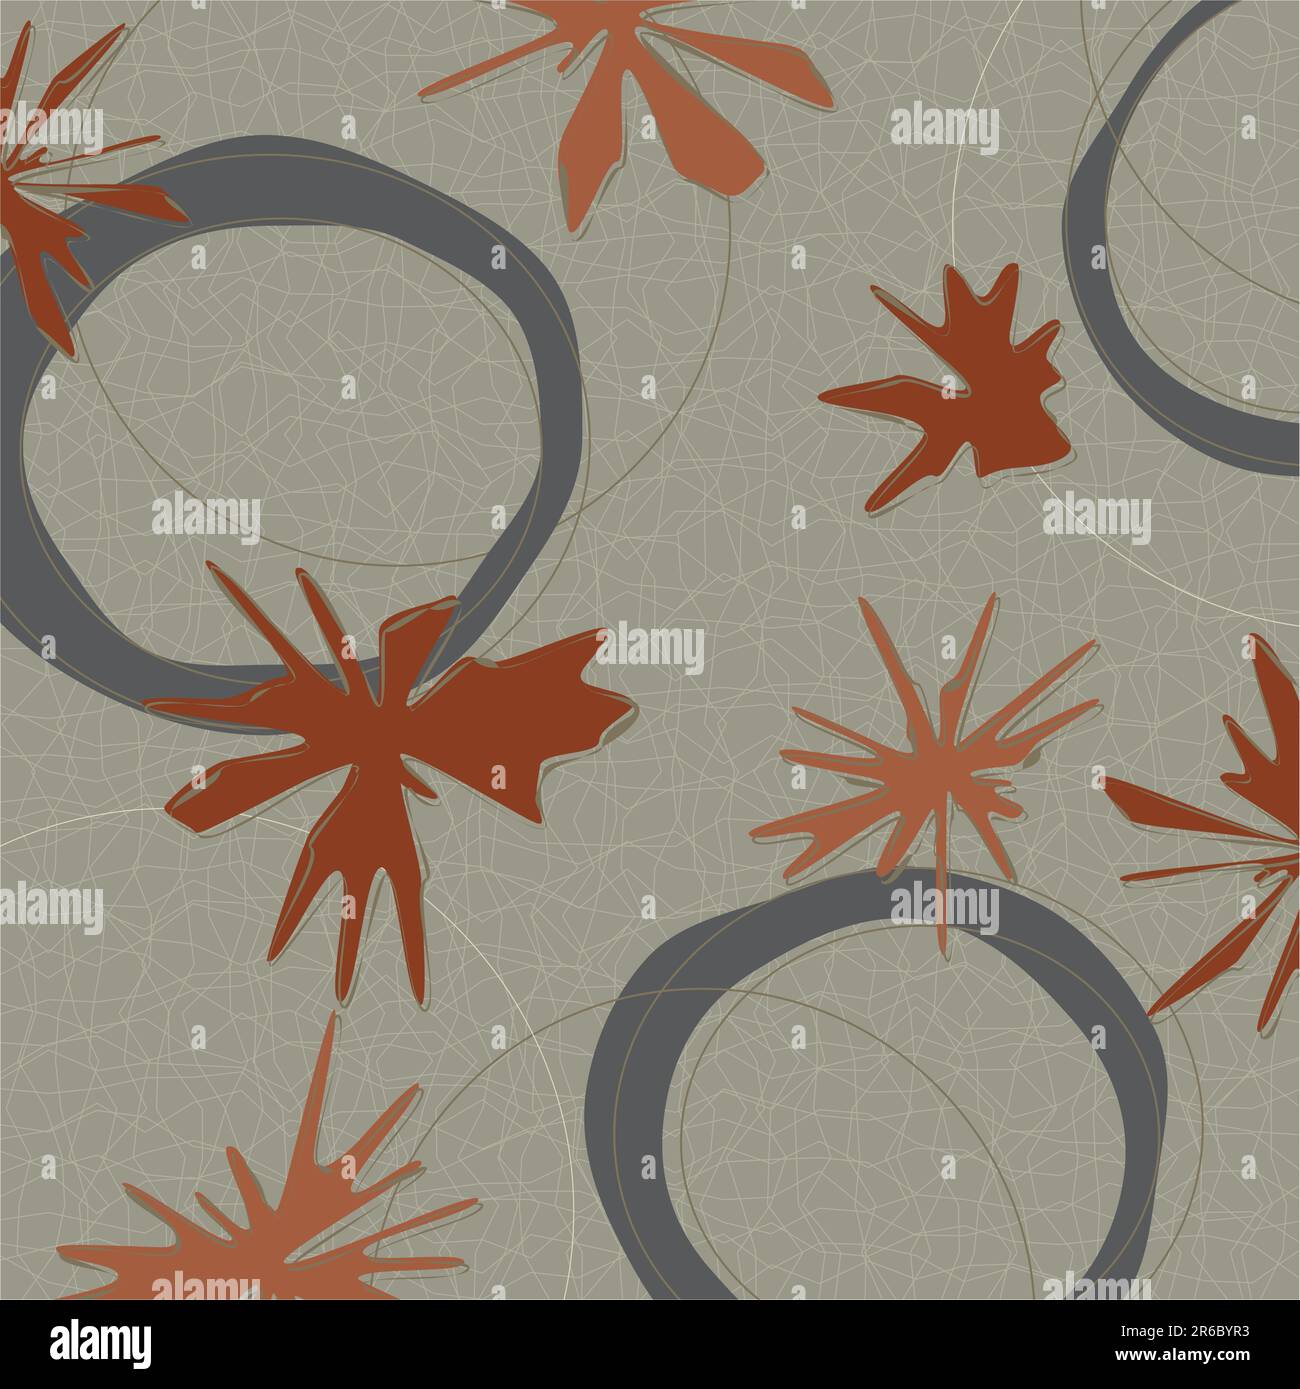 Retro barkcloth fabric-inspired design with stars and boomerangs. Each item is whole and grouped so you can use them independently from the backgro... Stock Vector